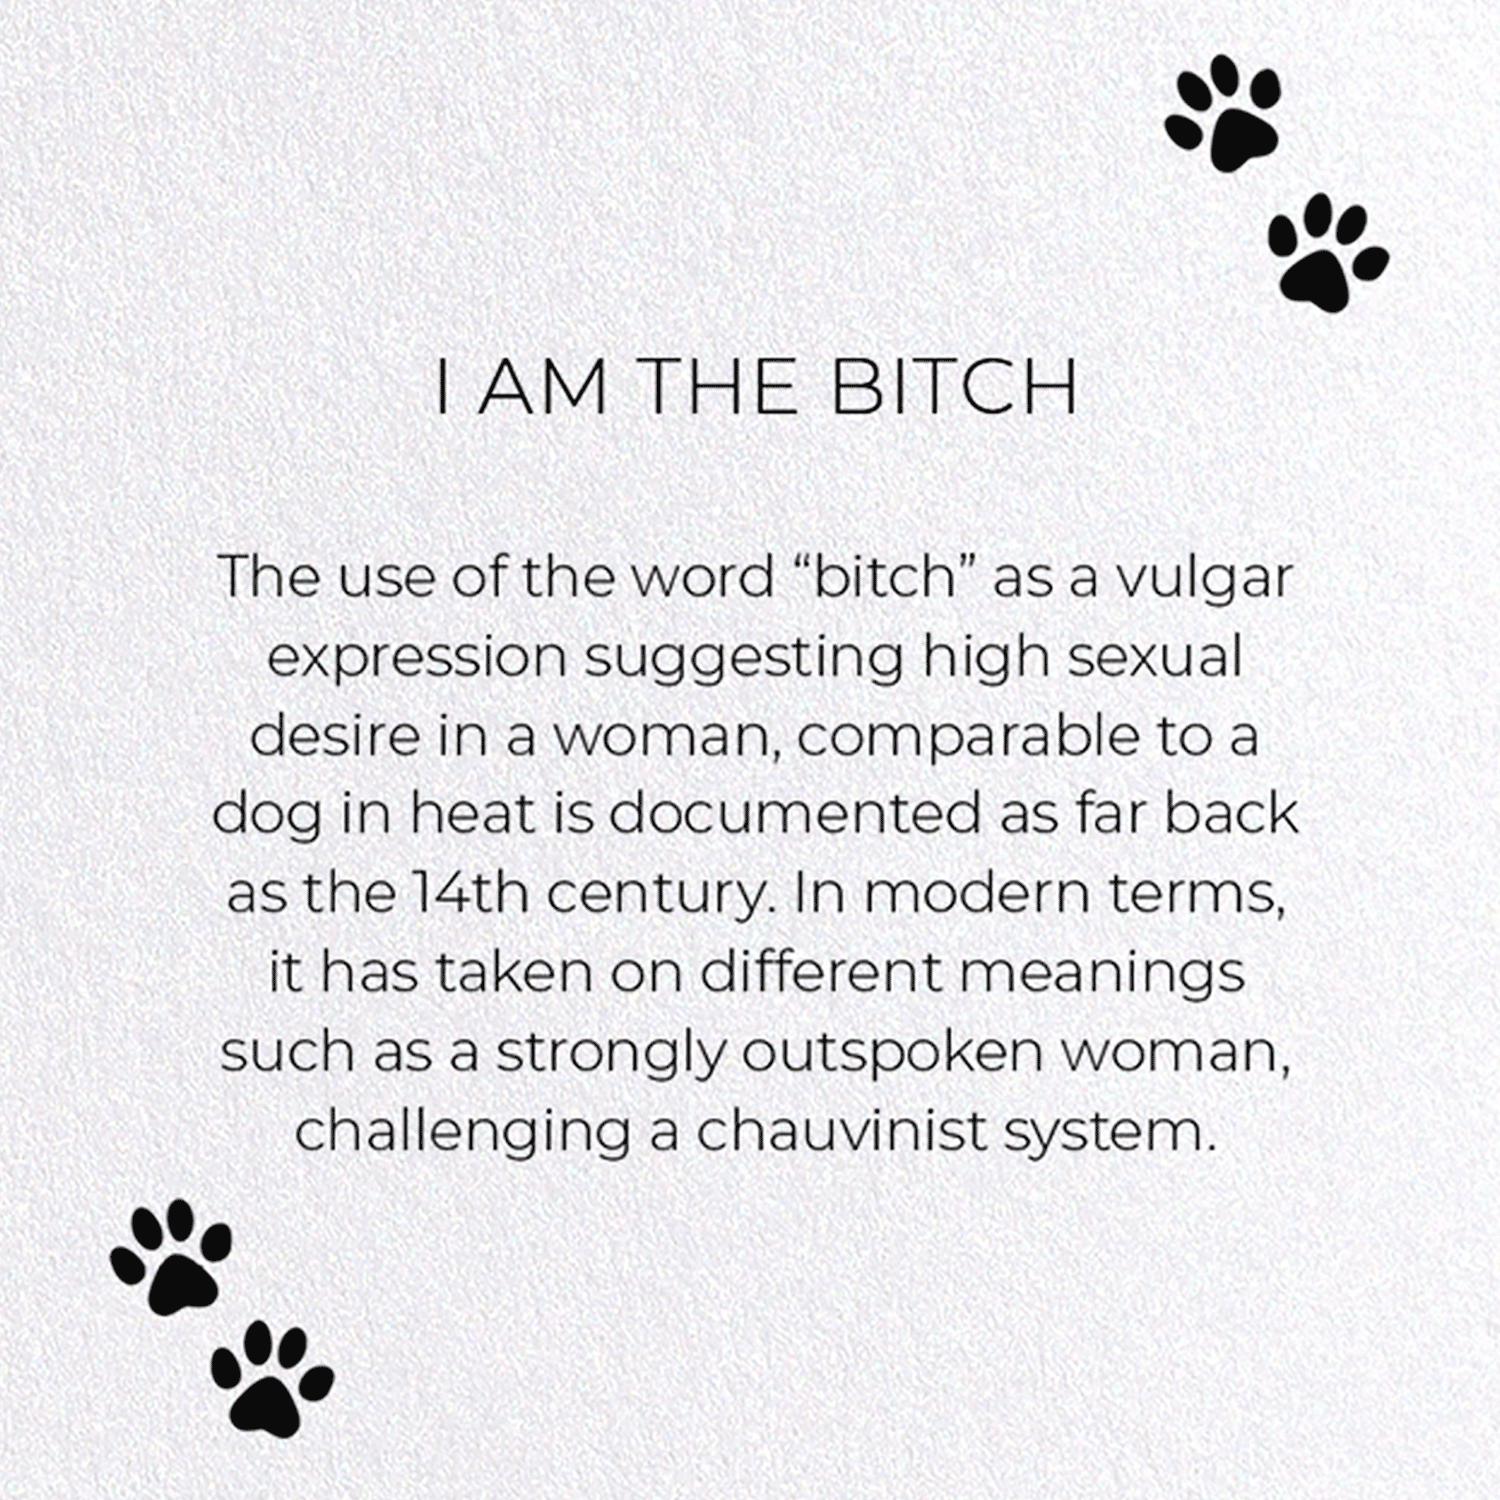 I AM THE BITCH: Funny Animal Greeting Card